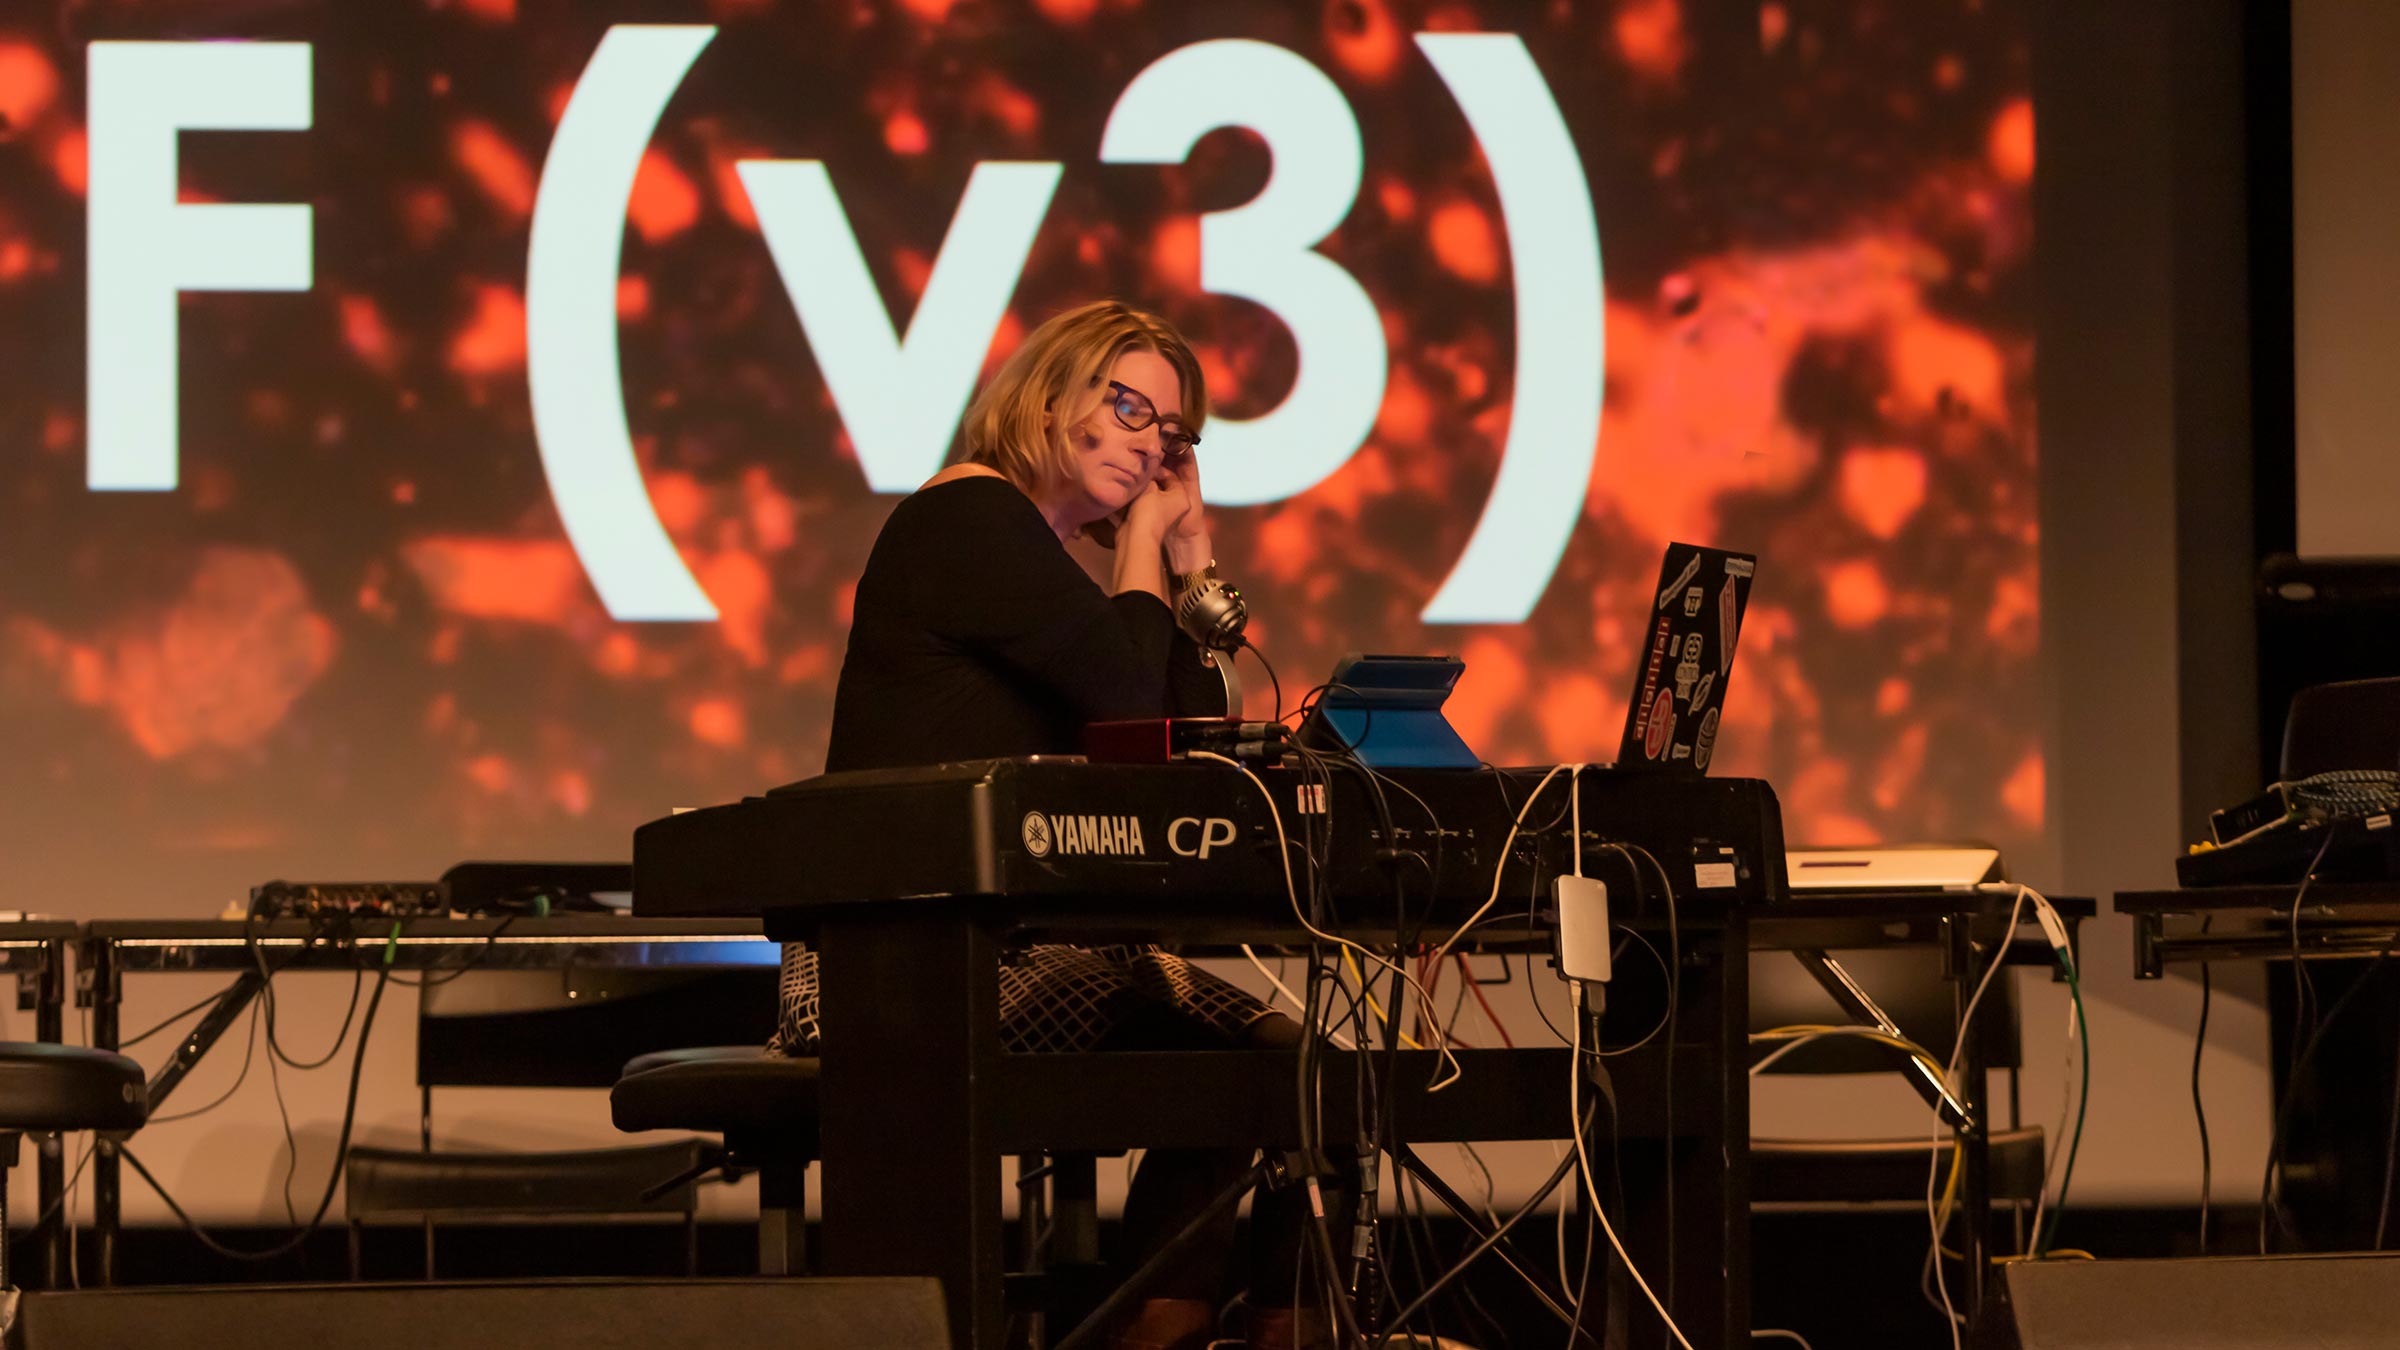 Rebekah Wilson during her keynote presentation at the Web Audio Conference 2019 (December 4, 2019). Photo by Shreejay Shrestha.